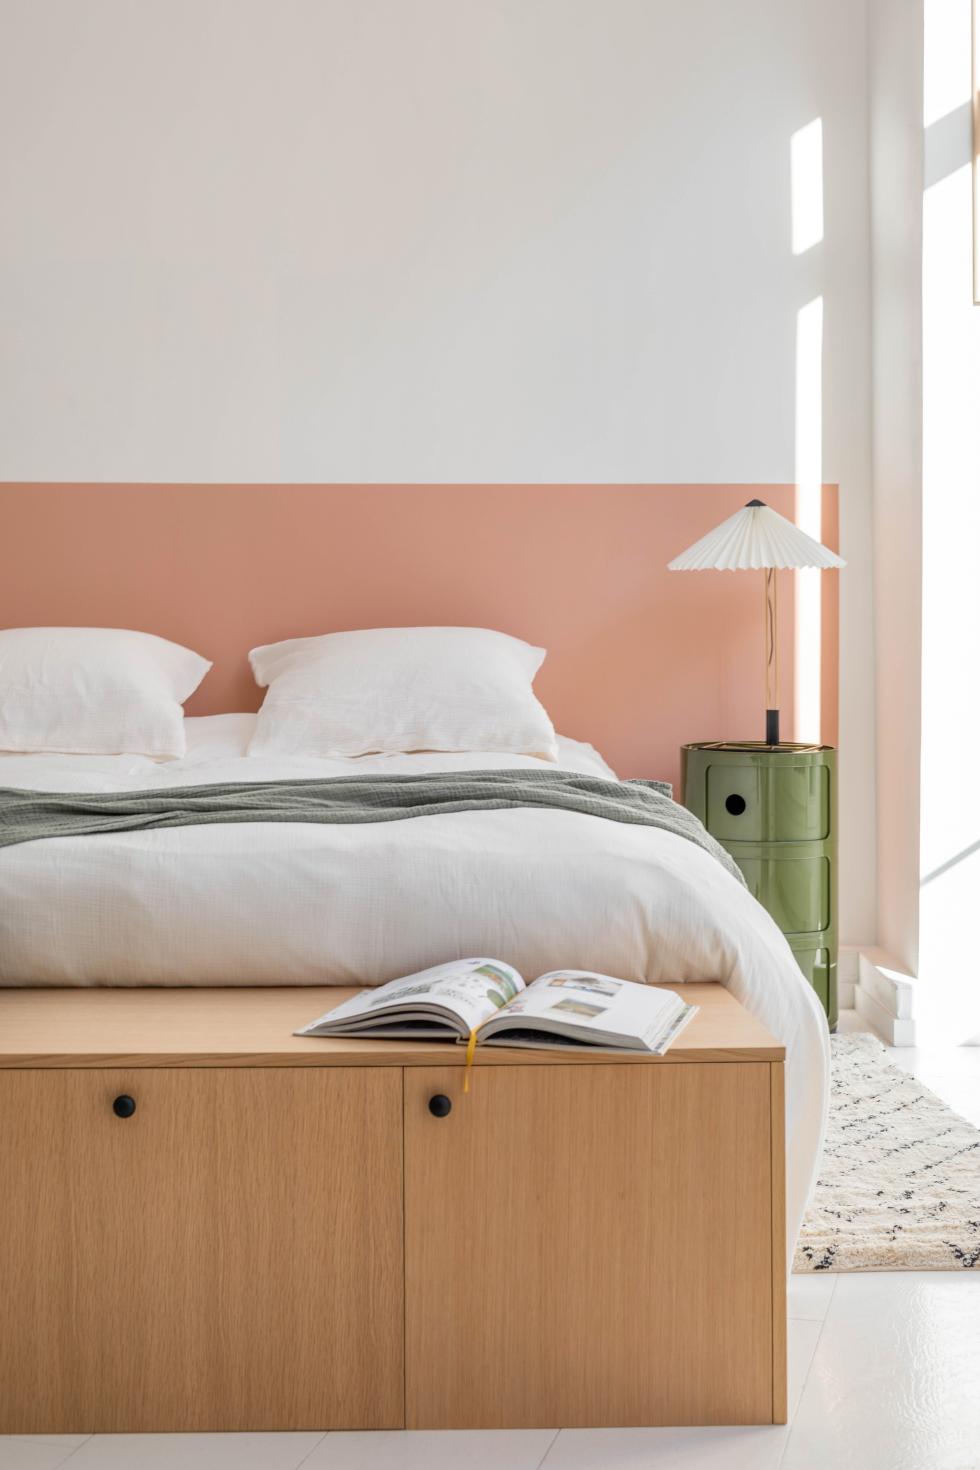 Project carried out by the Plum Living studio with our Blush paint - ⓒ Hervé Goluza for Plum Living